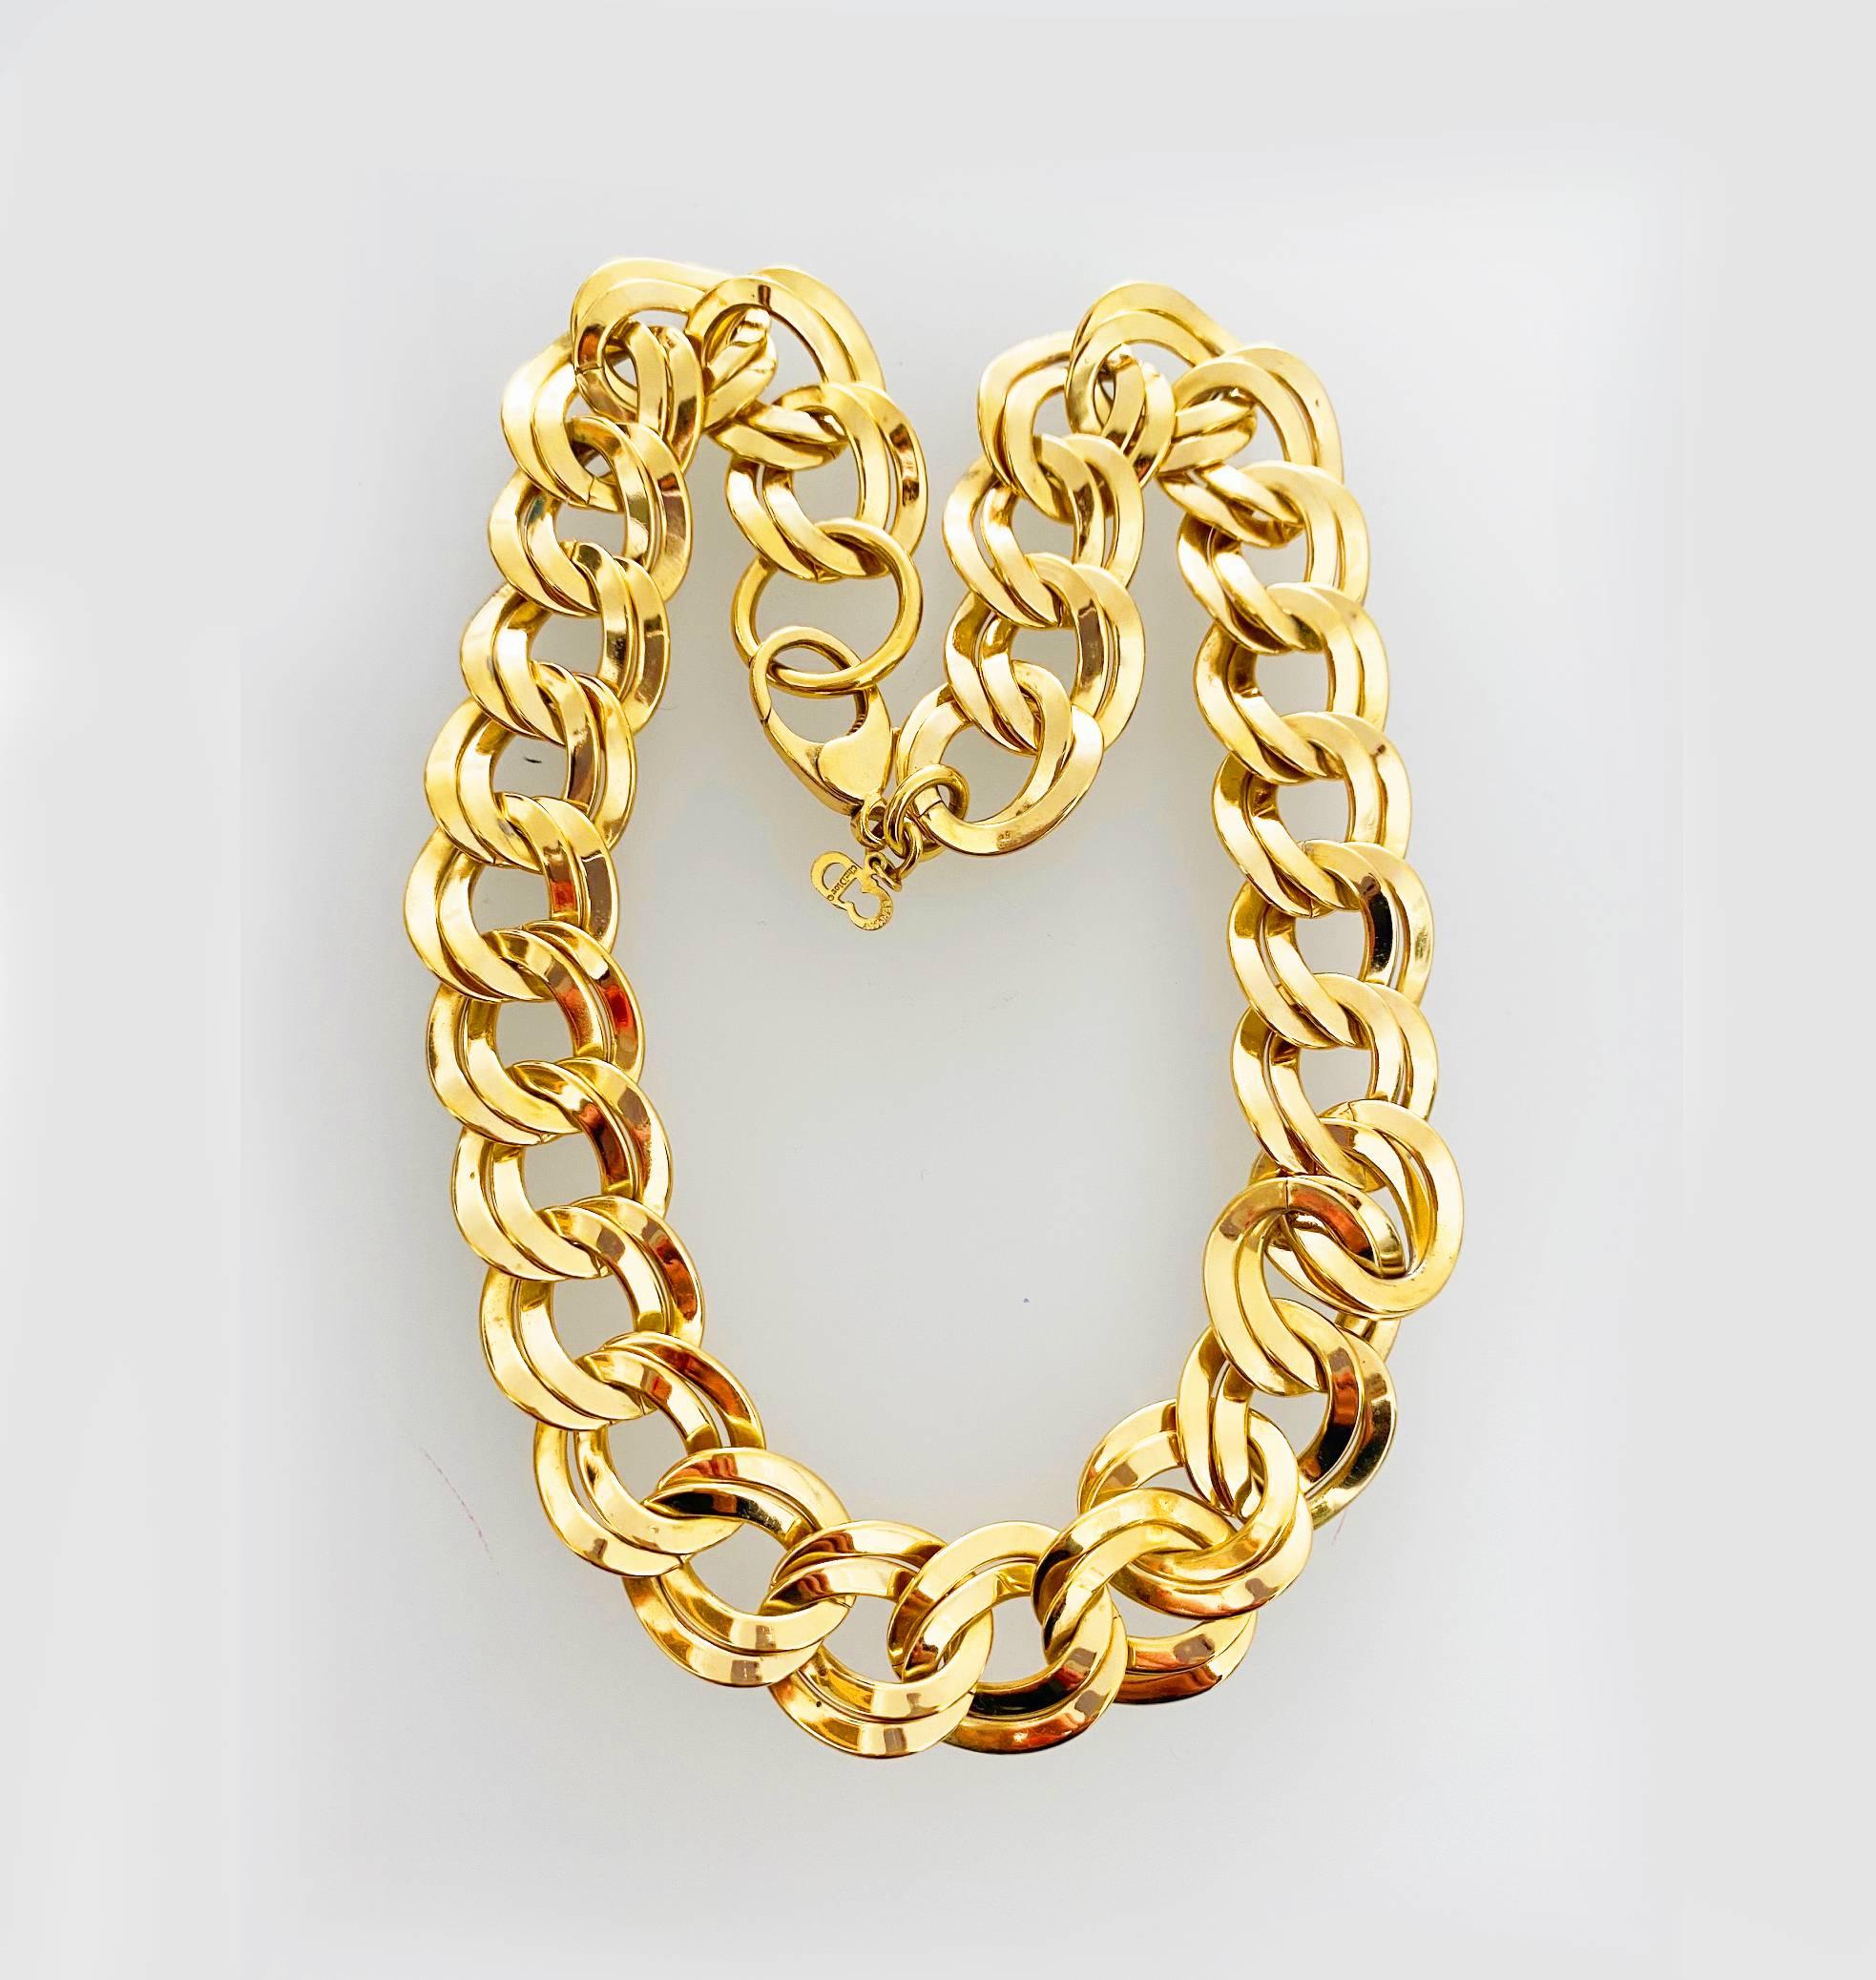 Christian Dior double link yellow gold tone chunky statement necklace, signed Christian Dior Germany to the back of the hanging CD on the clasp, Made in Germany,

Measurements:
- Total length: approx. 45.7cm  /18 1/4 